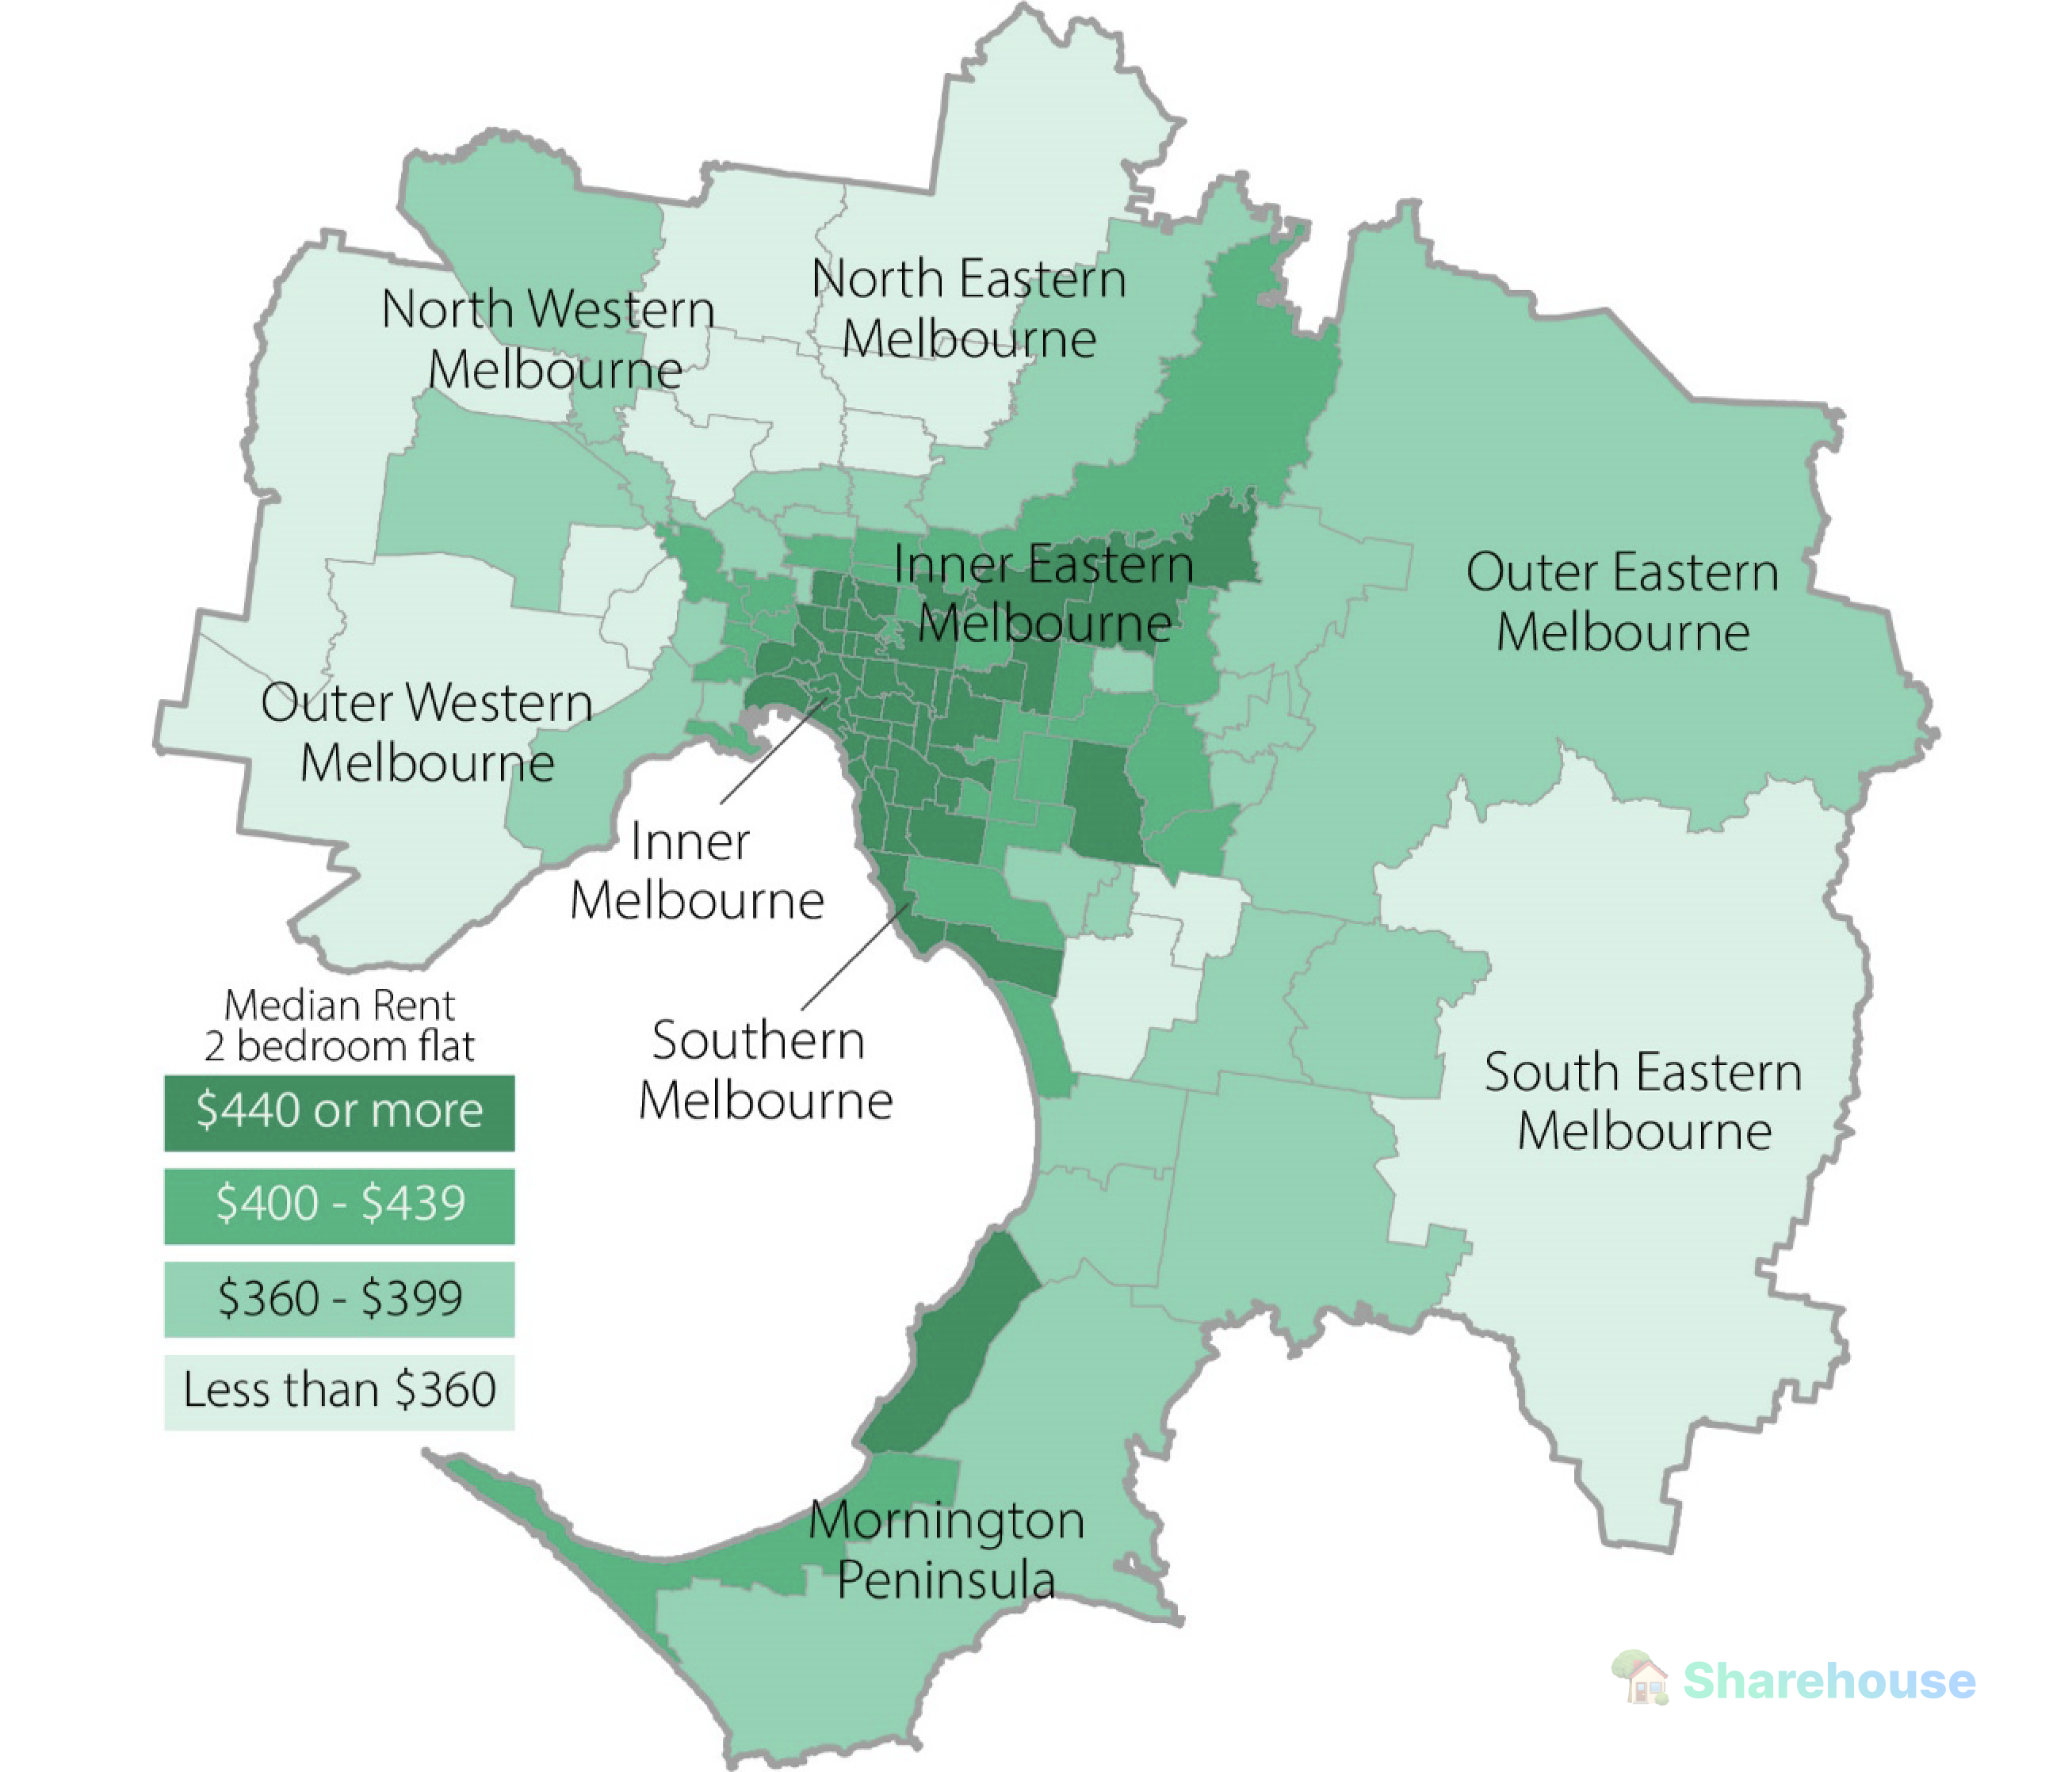 Moving annual median rents for 2 bedroom flats in metropolitan Melbourne (adapted from DFFH VIC)